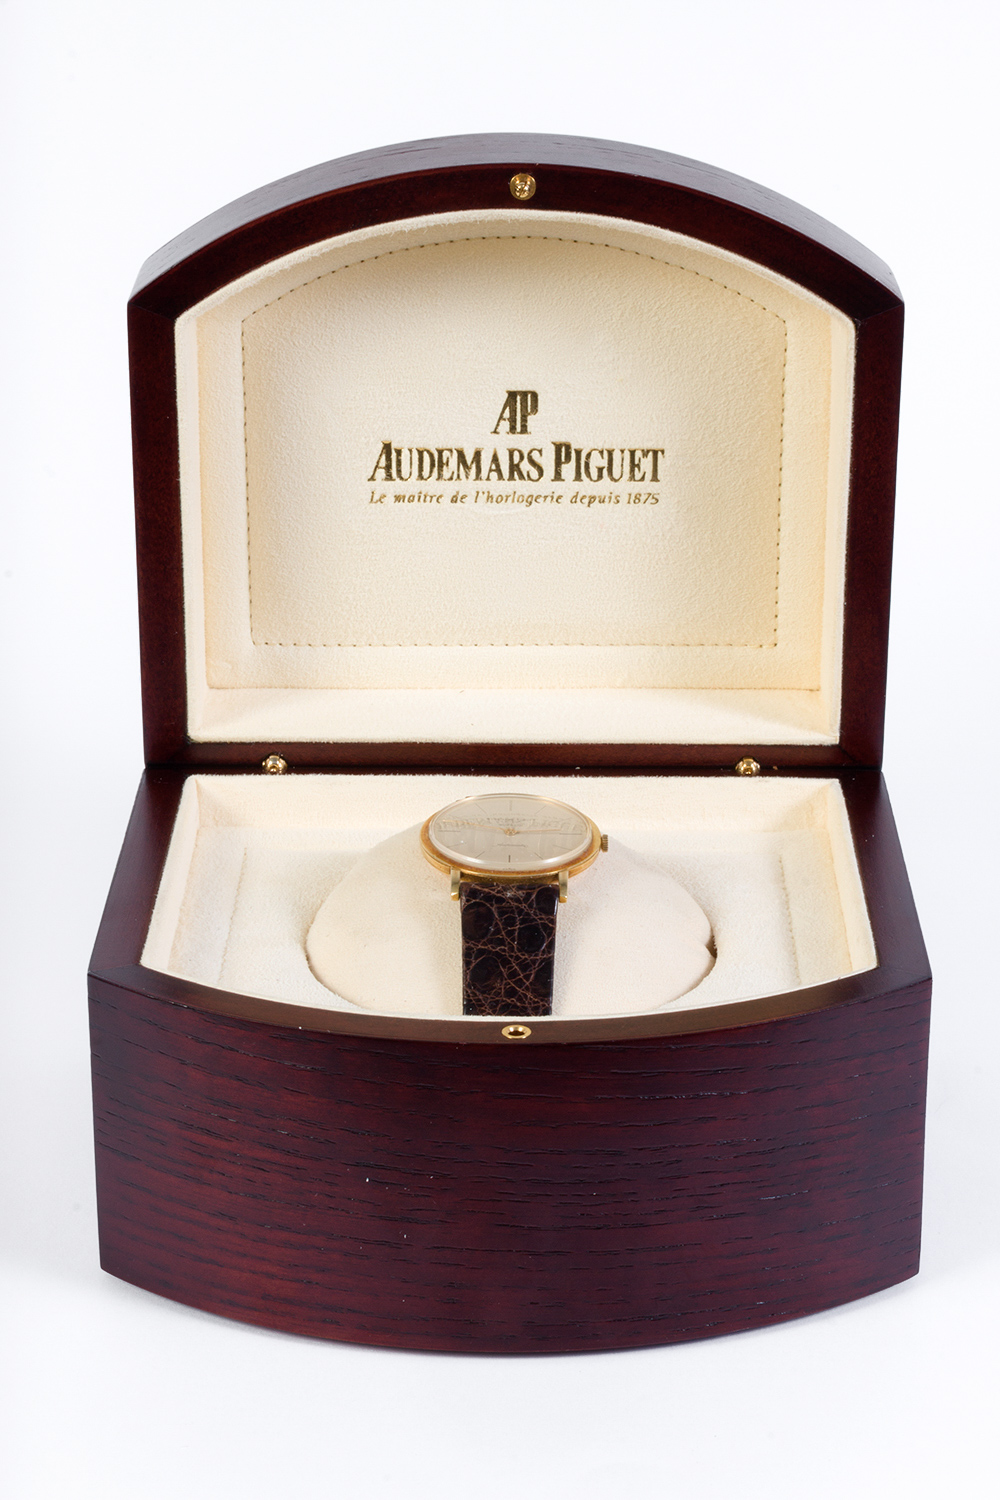 Audemars Piguet wristwatch, Gübelin model, in gold and leather strap. Automatic movement. - Image 5 of 6